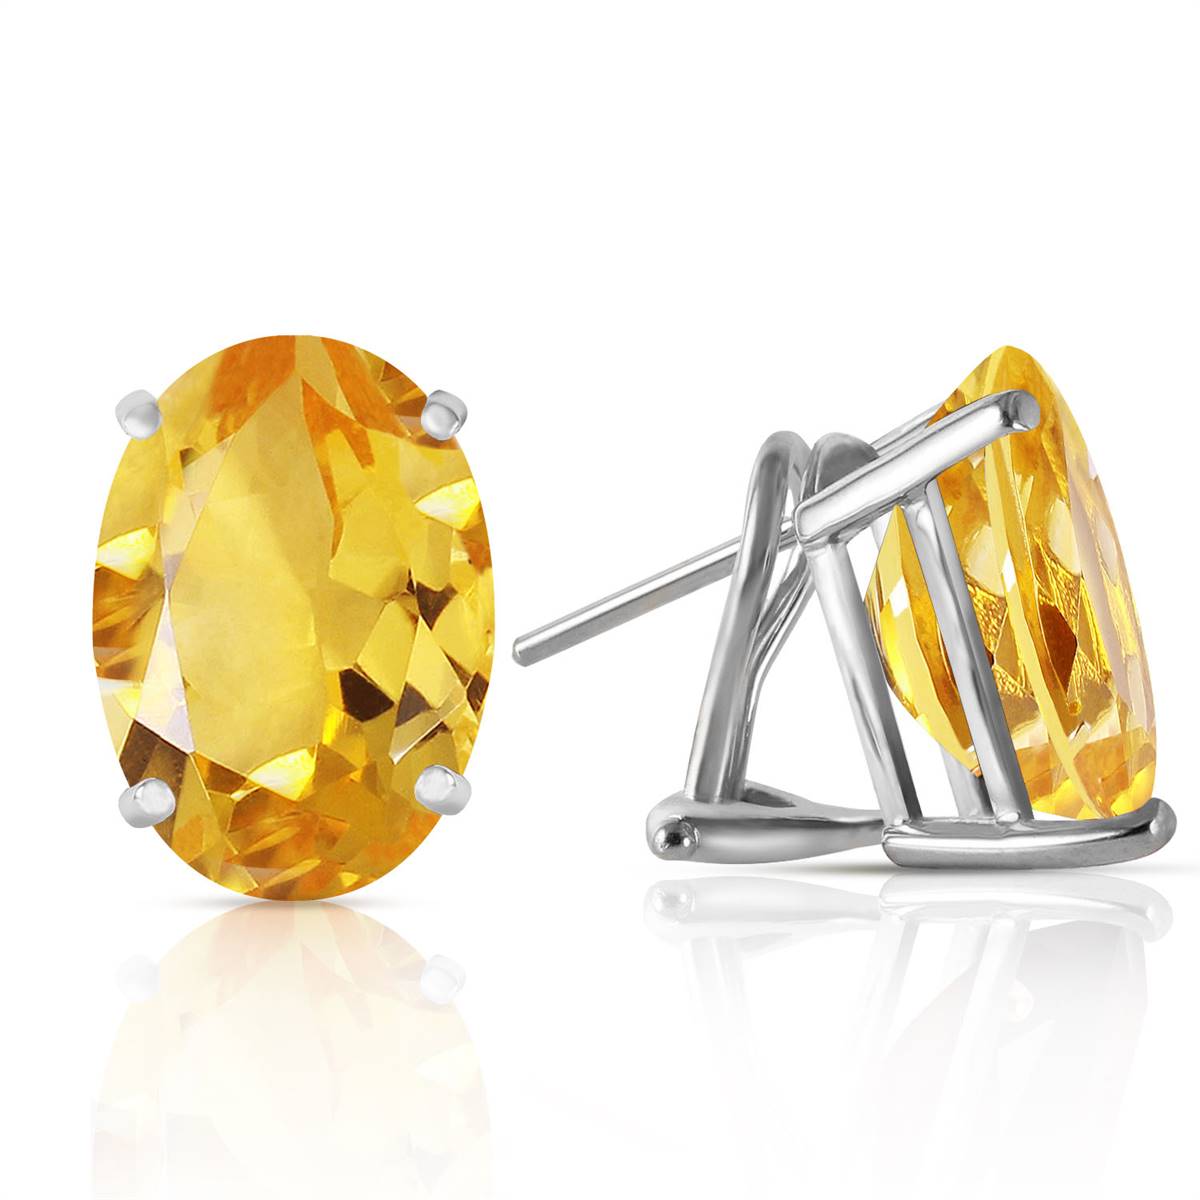 13 Carat 14K Solid White Gold French Clips Earrings Natural Citrine